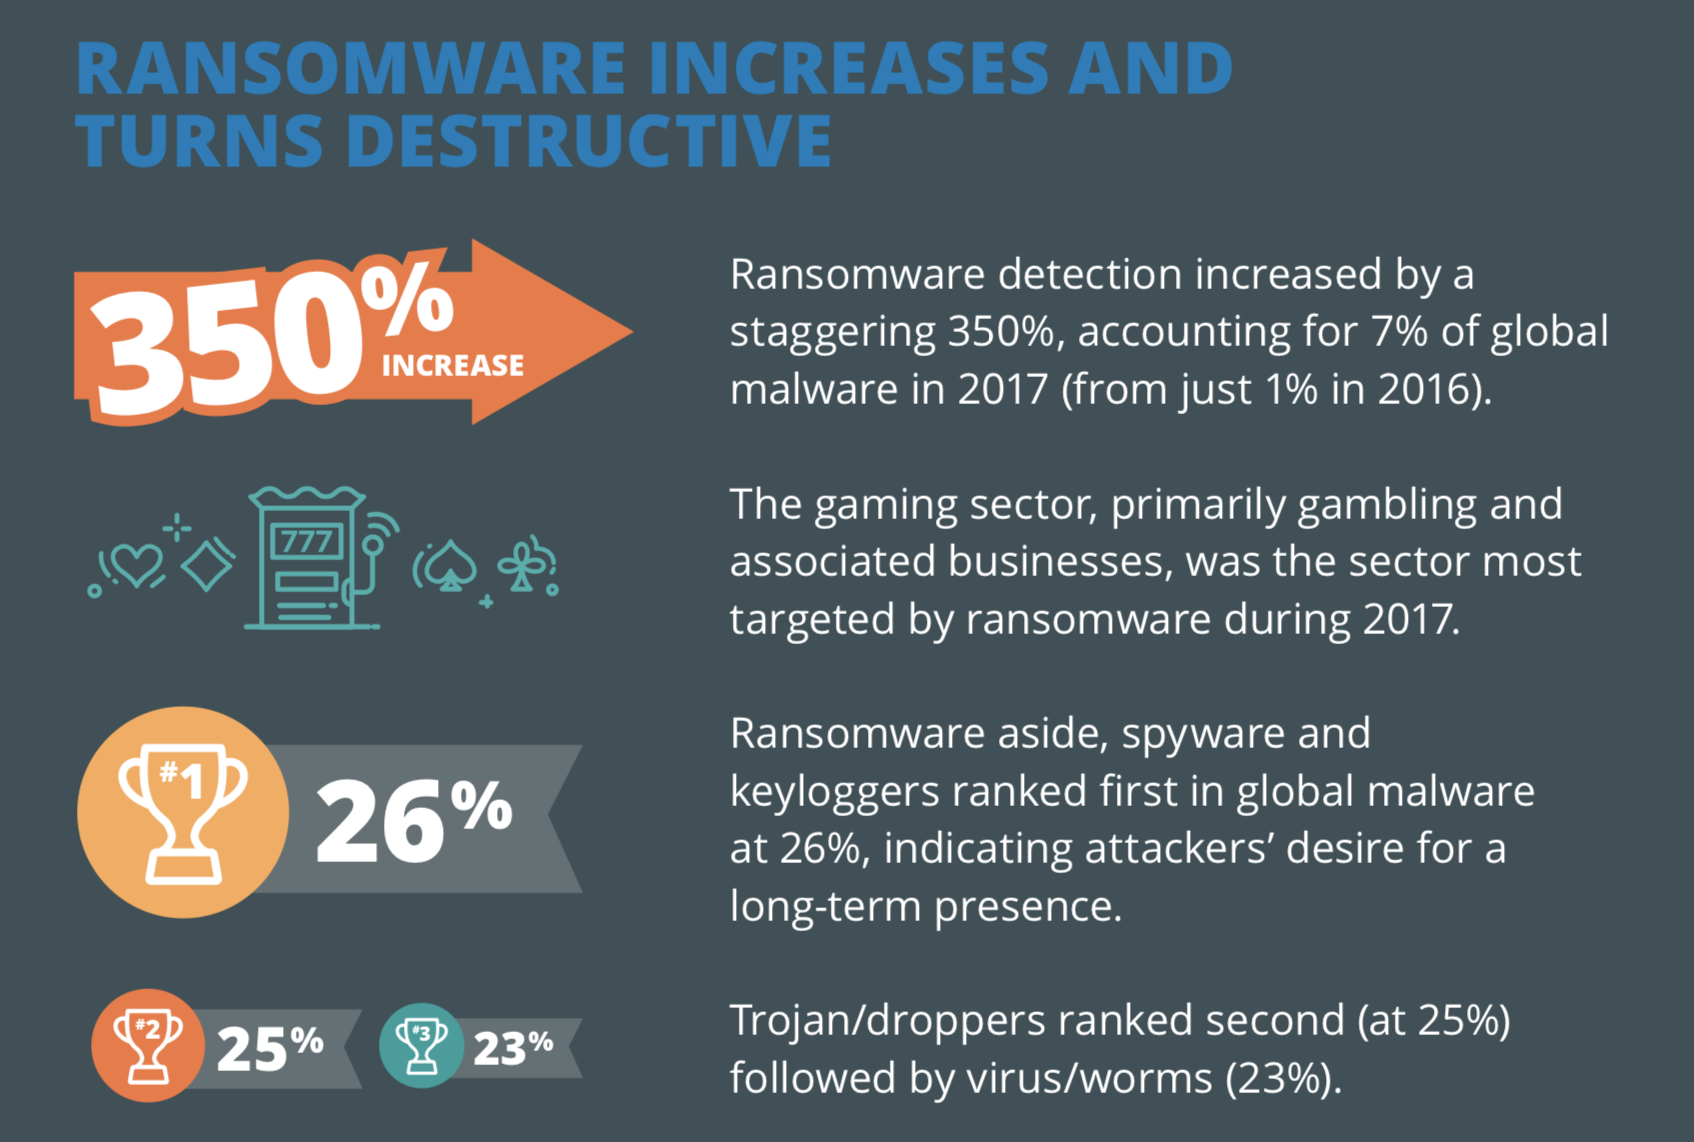 RANSOMWARE INCREASES AND TURNS DESTRUCTIVE